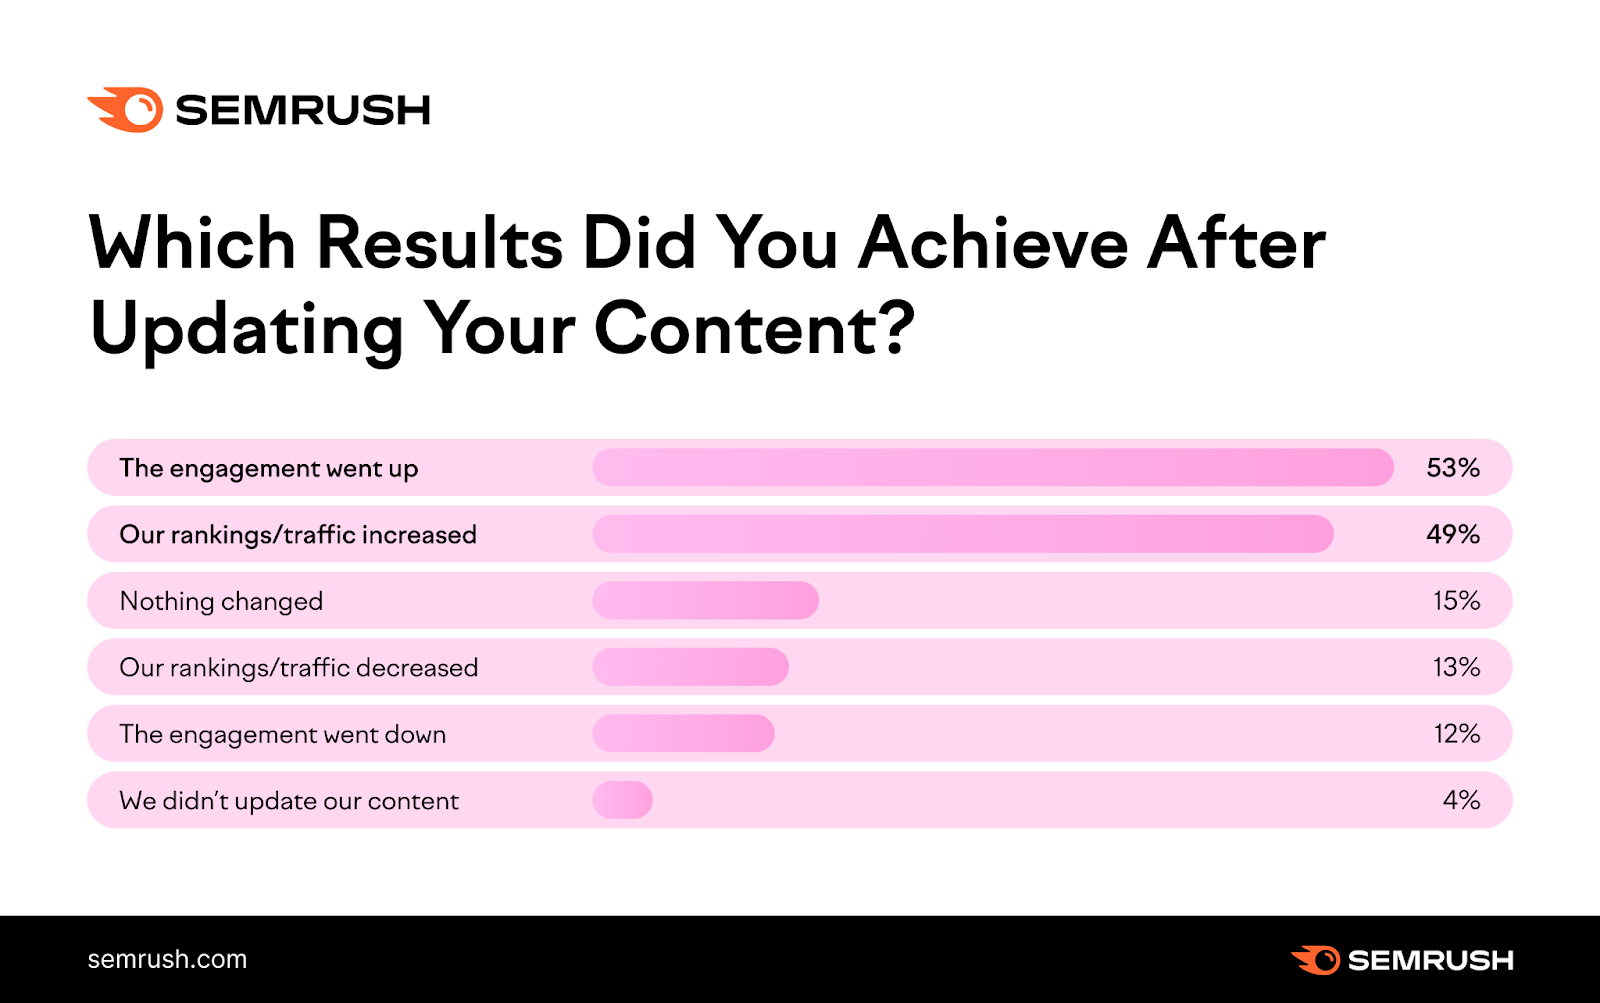 An infographic by Semrush showing the answers to "which results did you achieve after updating your content?"